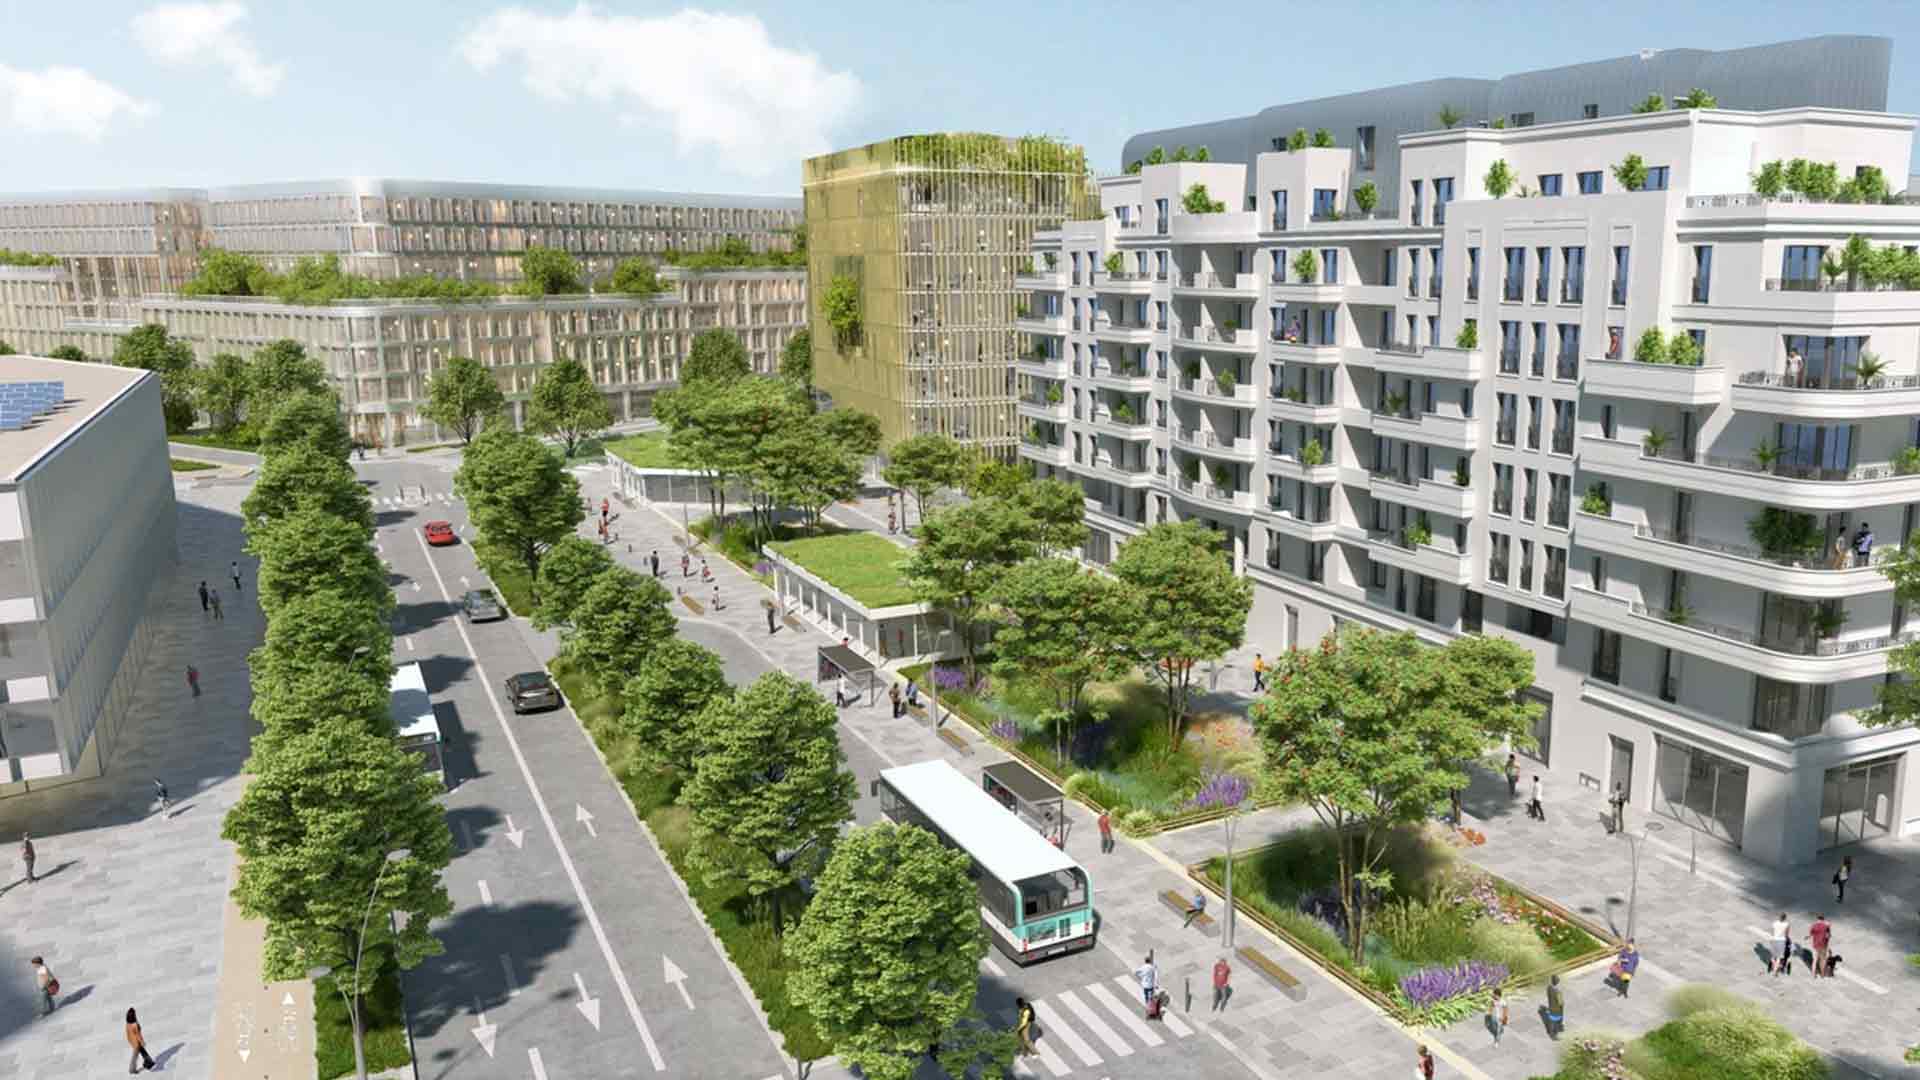 A 100-hectar Eco-District on the Banks of the Seine